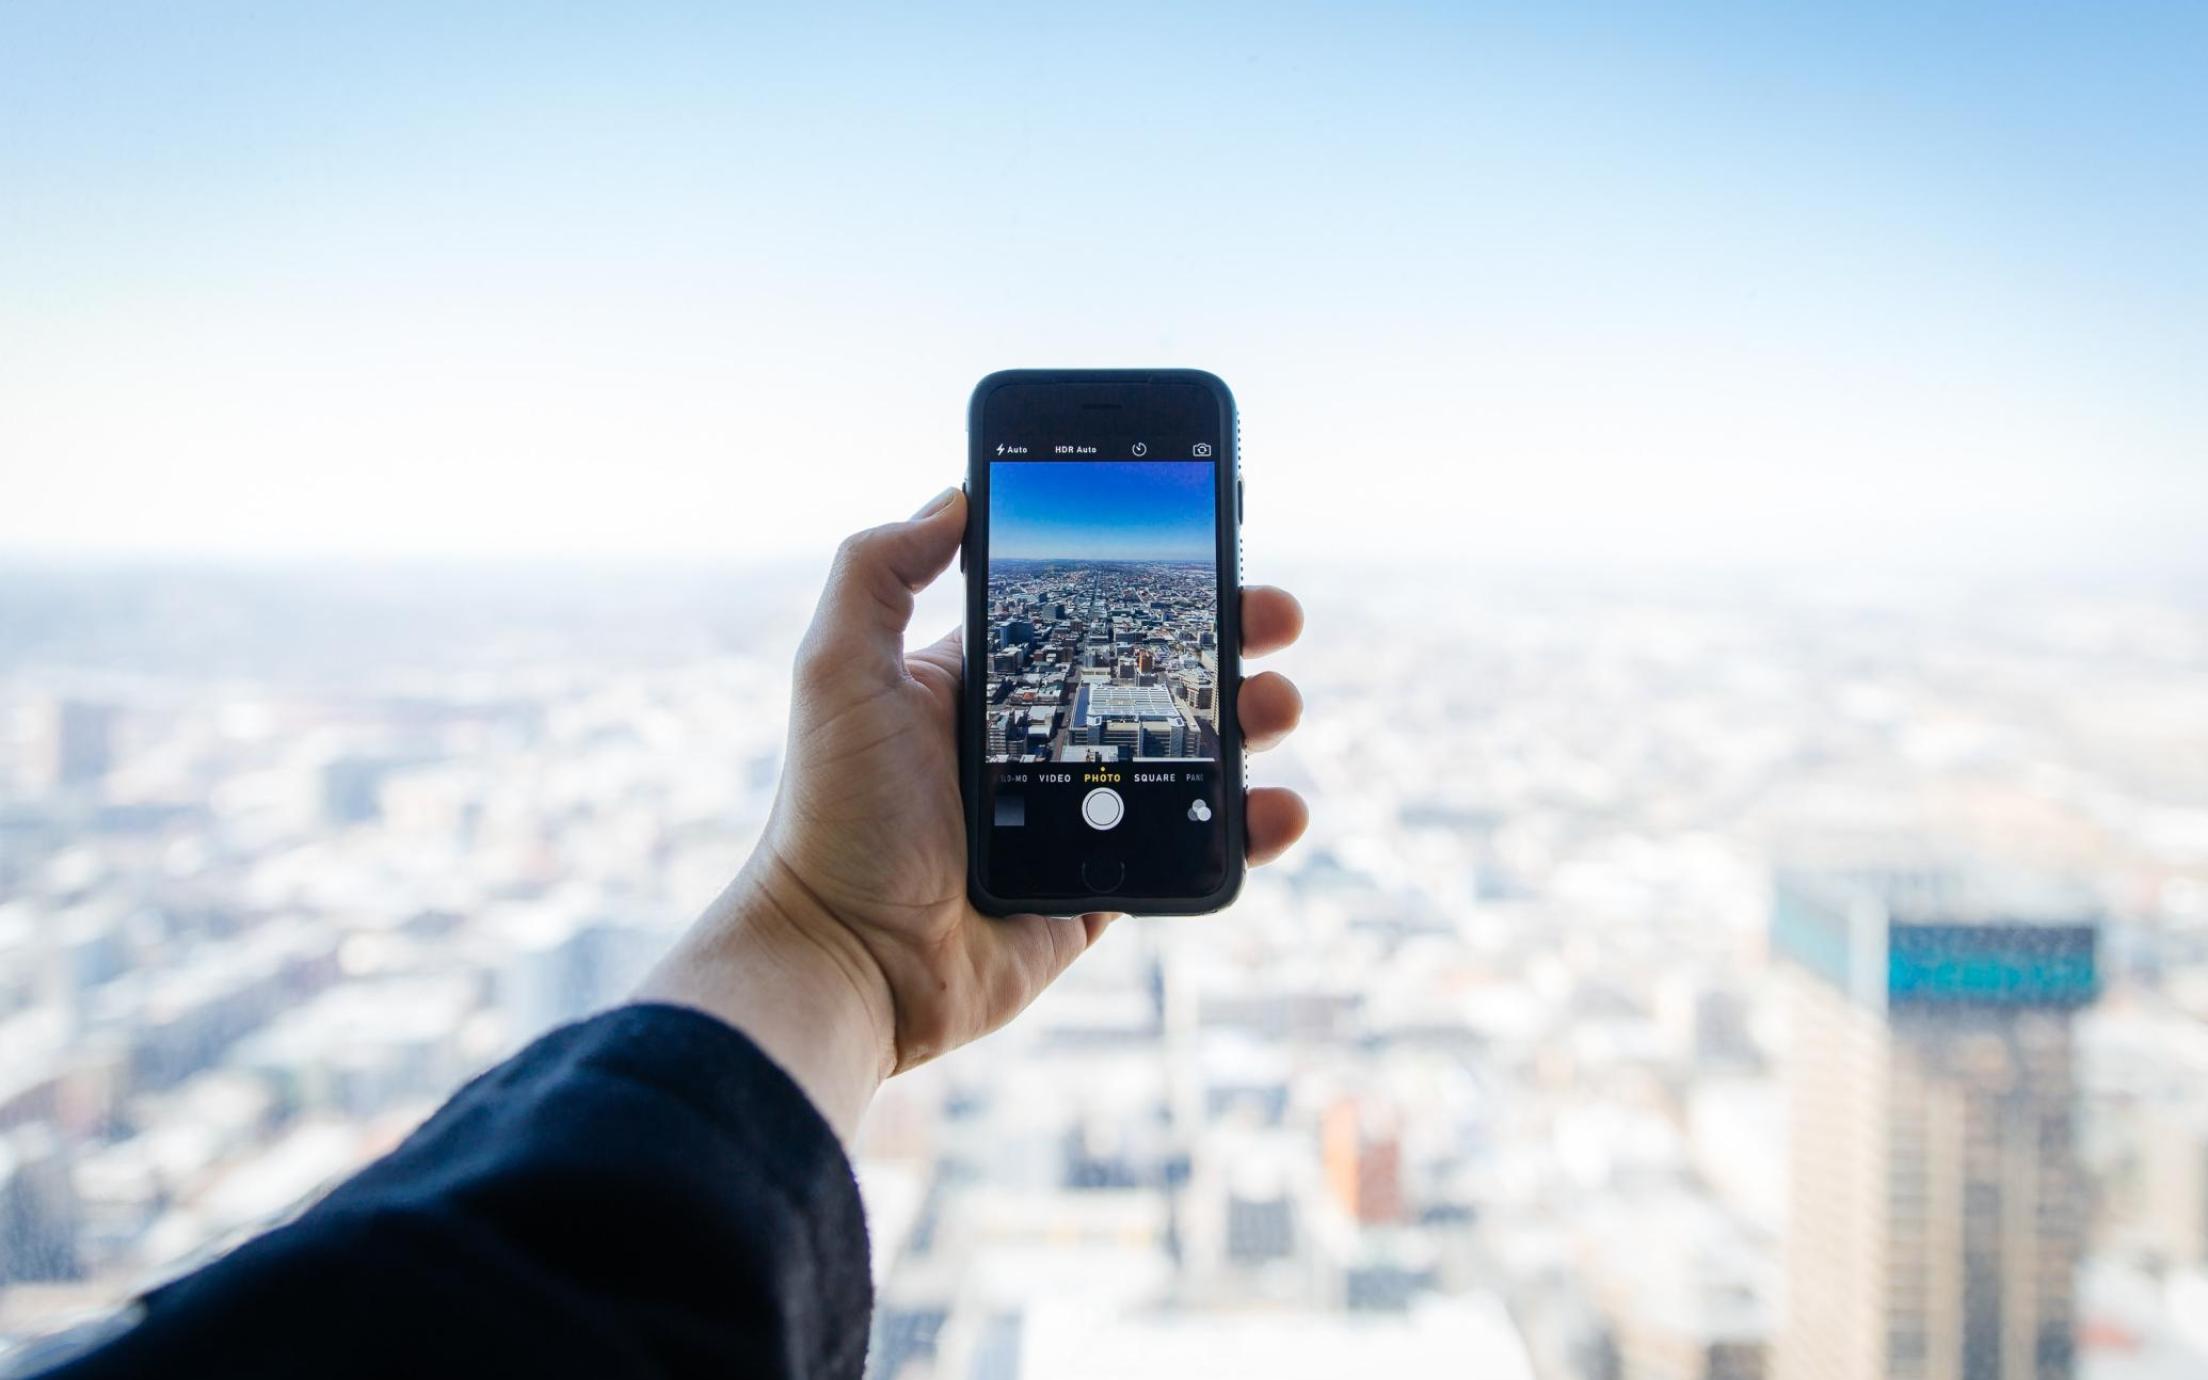 person holding cellphone out to take a picture of a city view